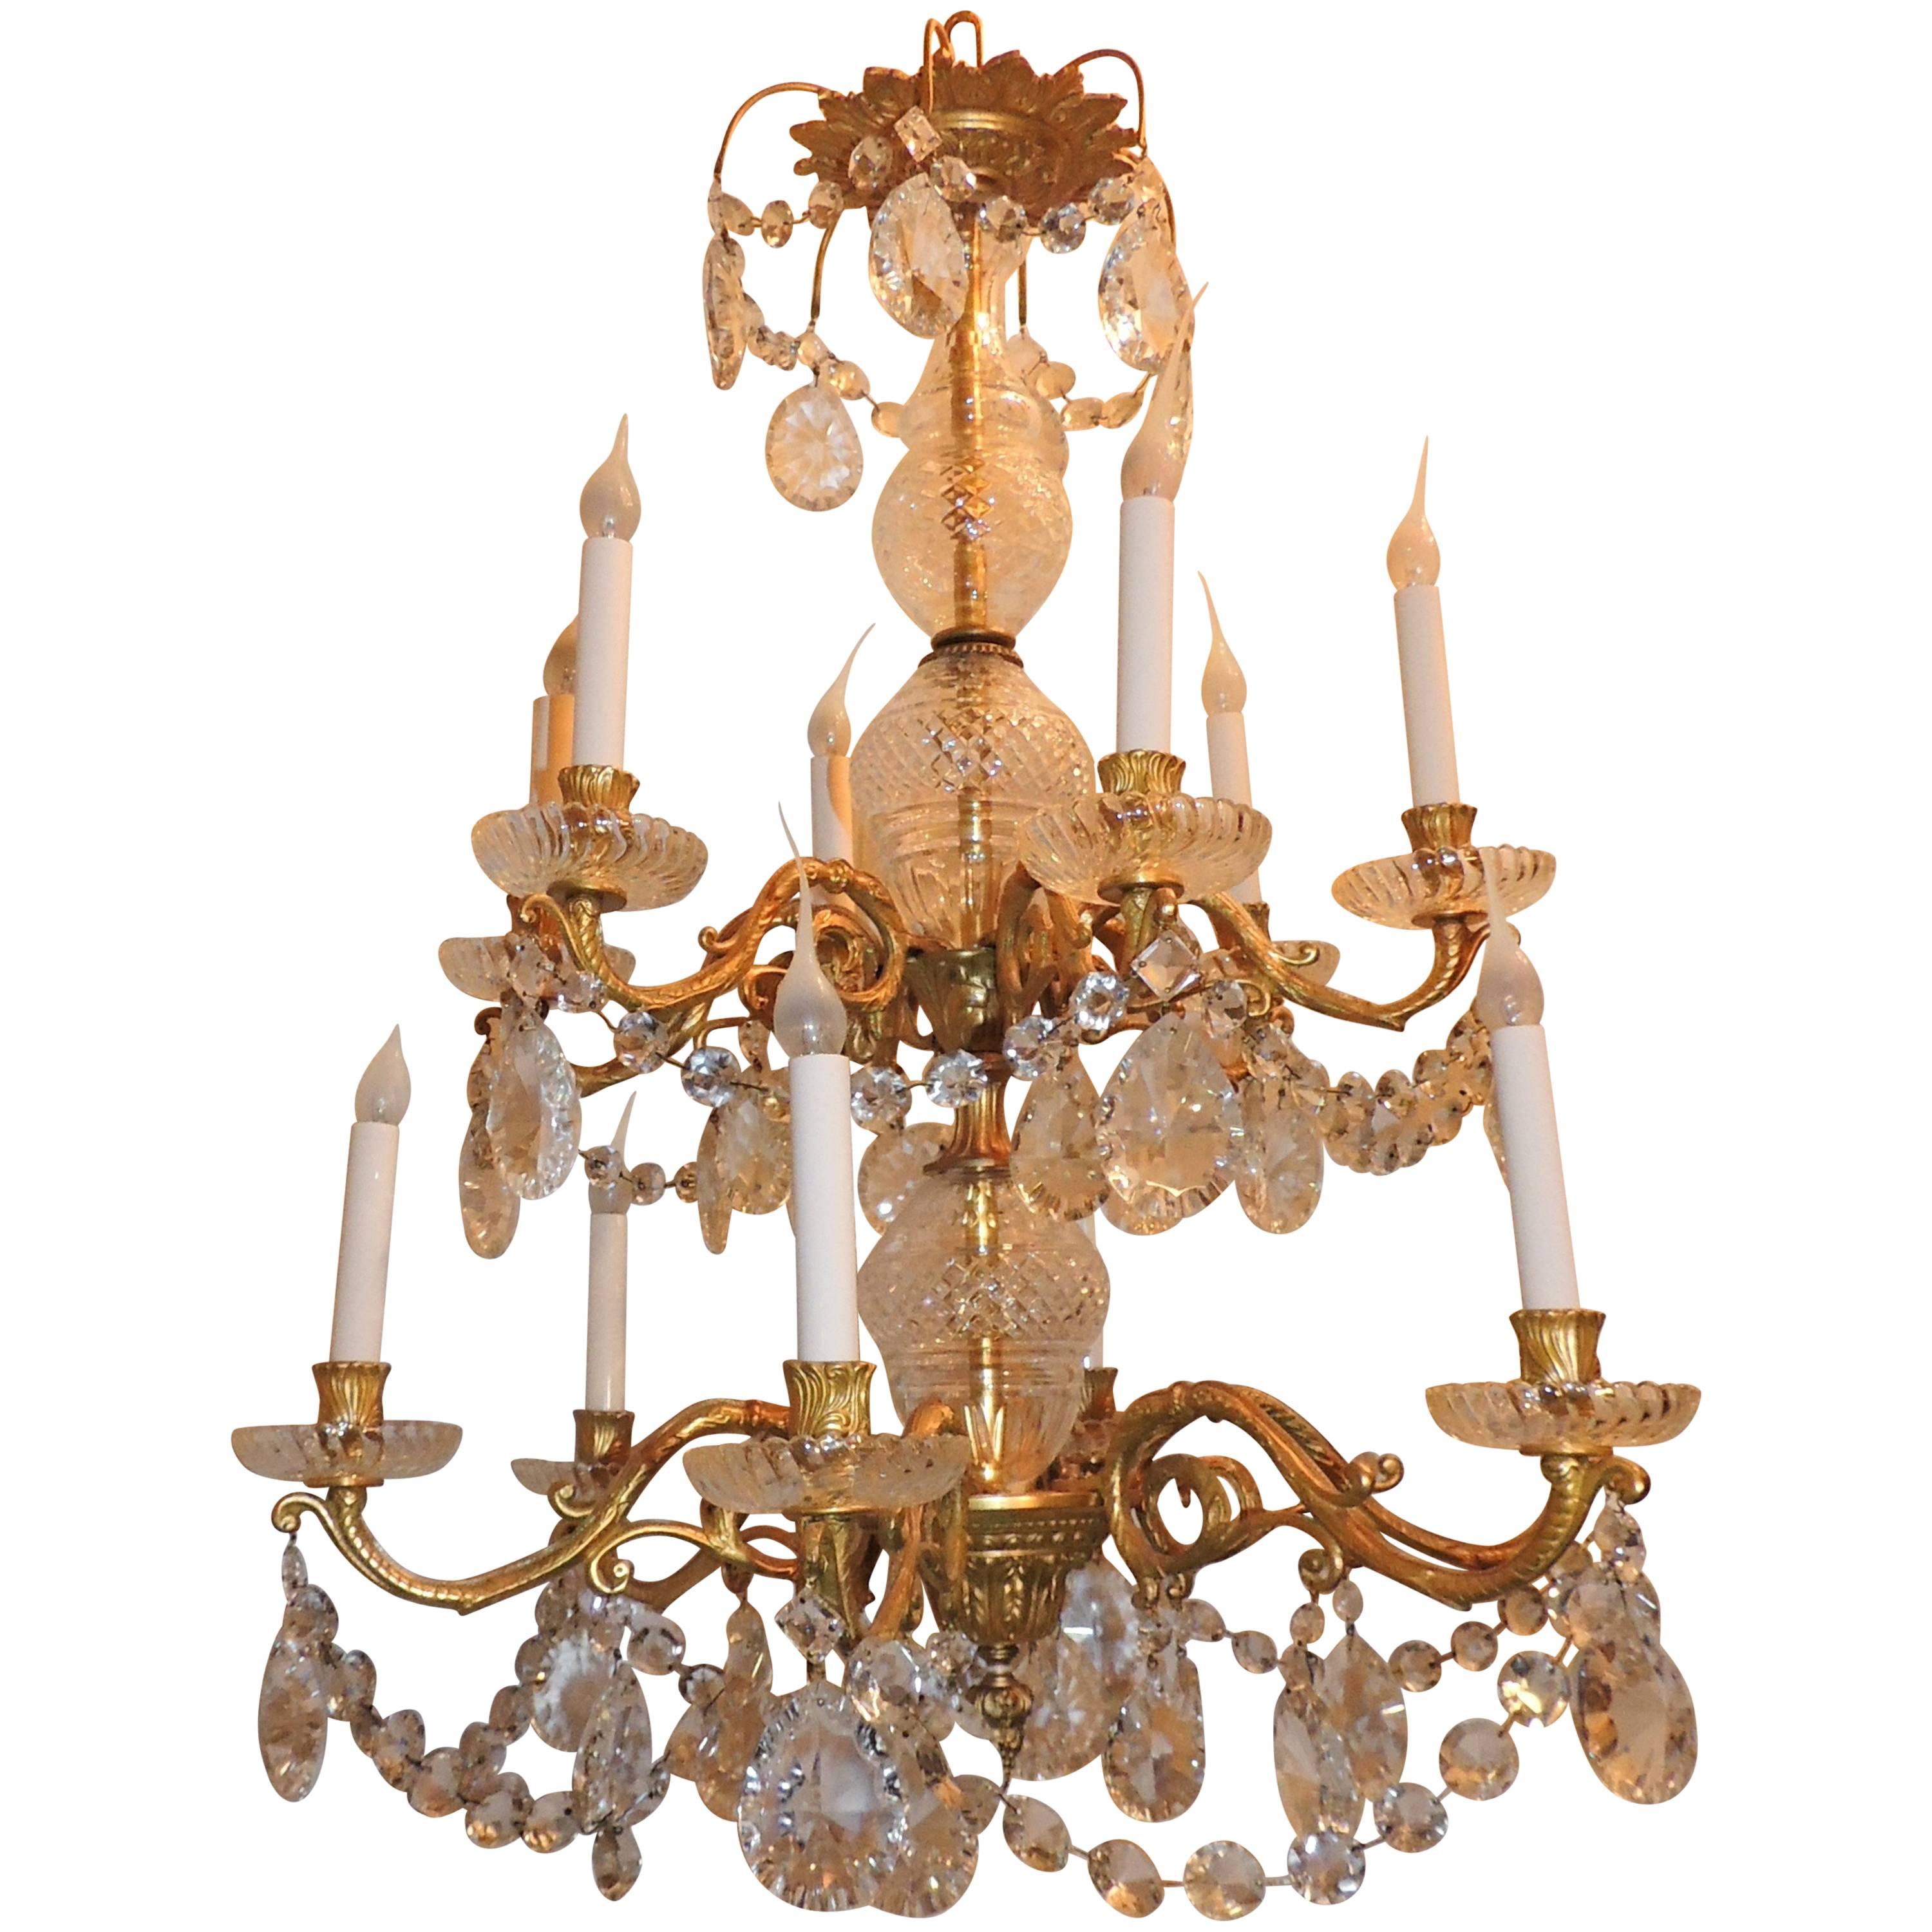 French Three-Tier 12-Arm Cut Crystal Dore Bronze Chandelier Floral Fixture